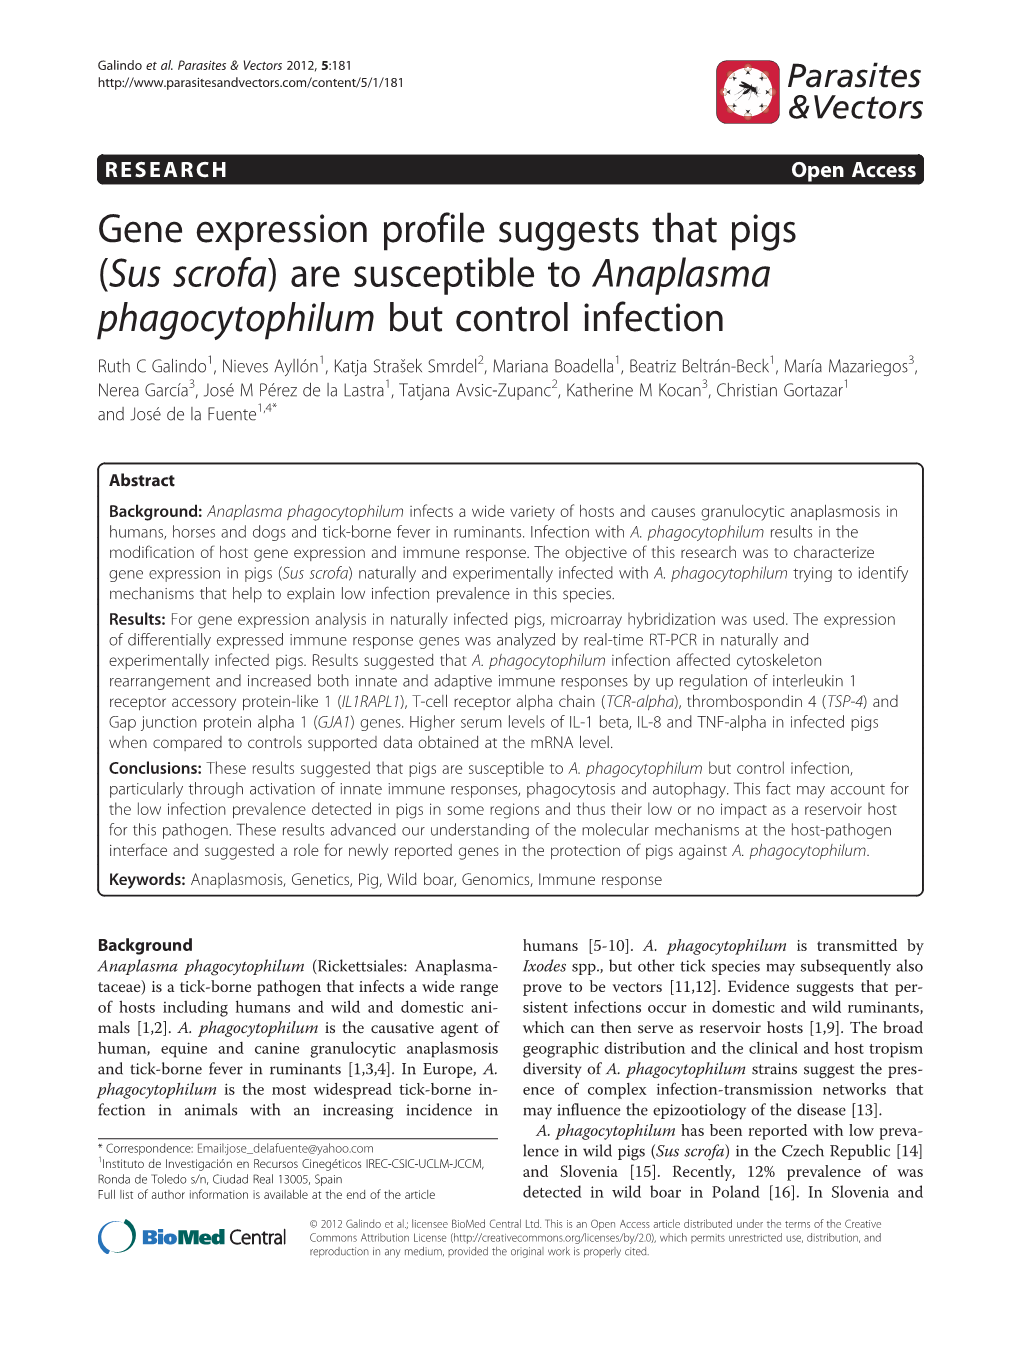 Gene Expression Profile Suggests That Pigs (Sus Scrofa